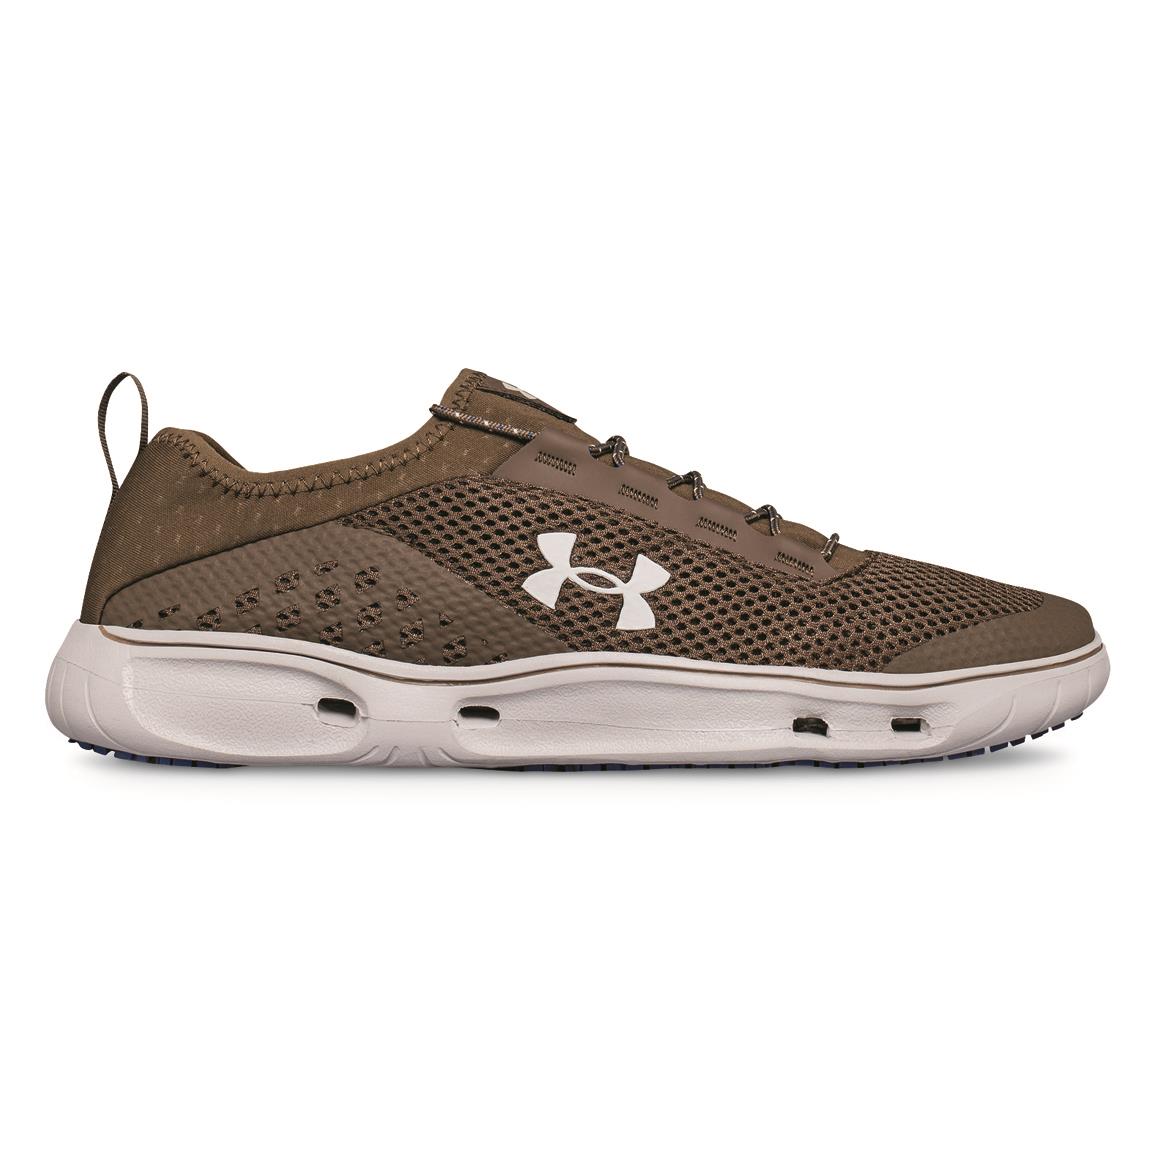 Under Armour Men's Kilchis Water Shoes 656095, Boat